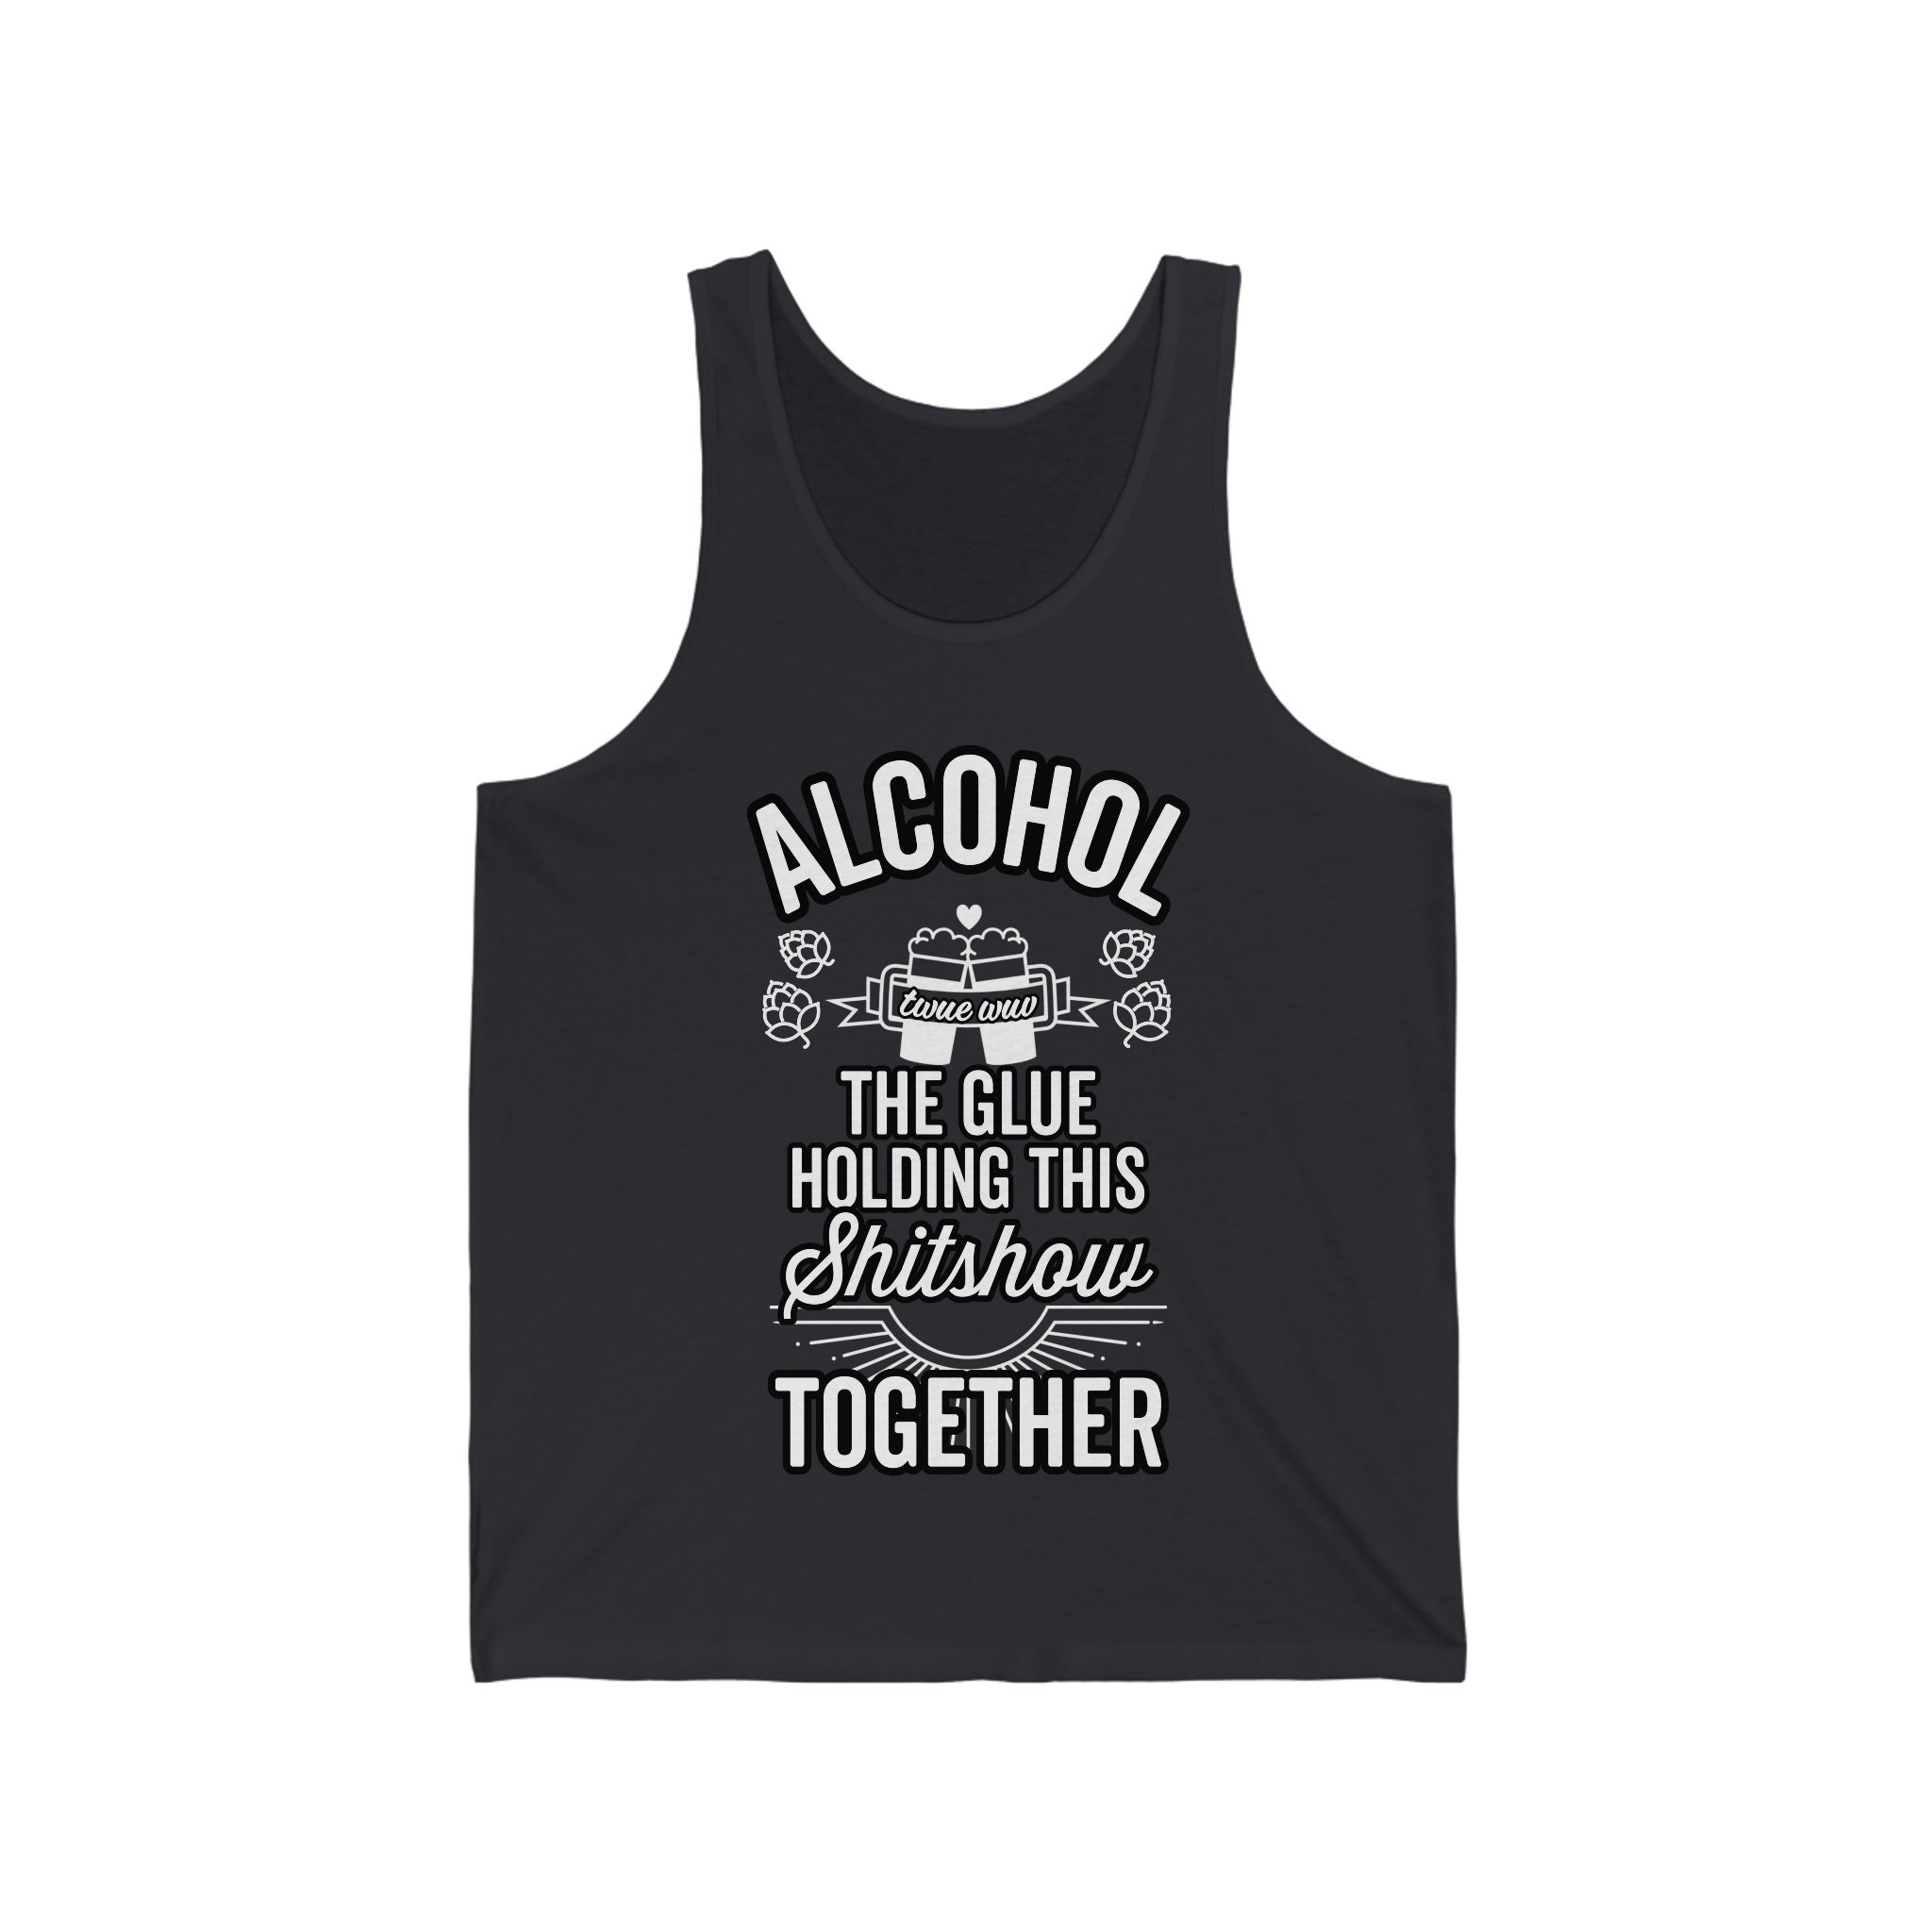 Alcohol, the Glue Holding This Shitshow Together Gray Unisex Short Sleeve  T-shirt With FREE SHIPPING 